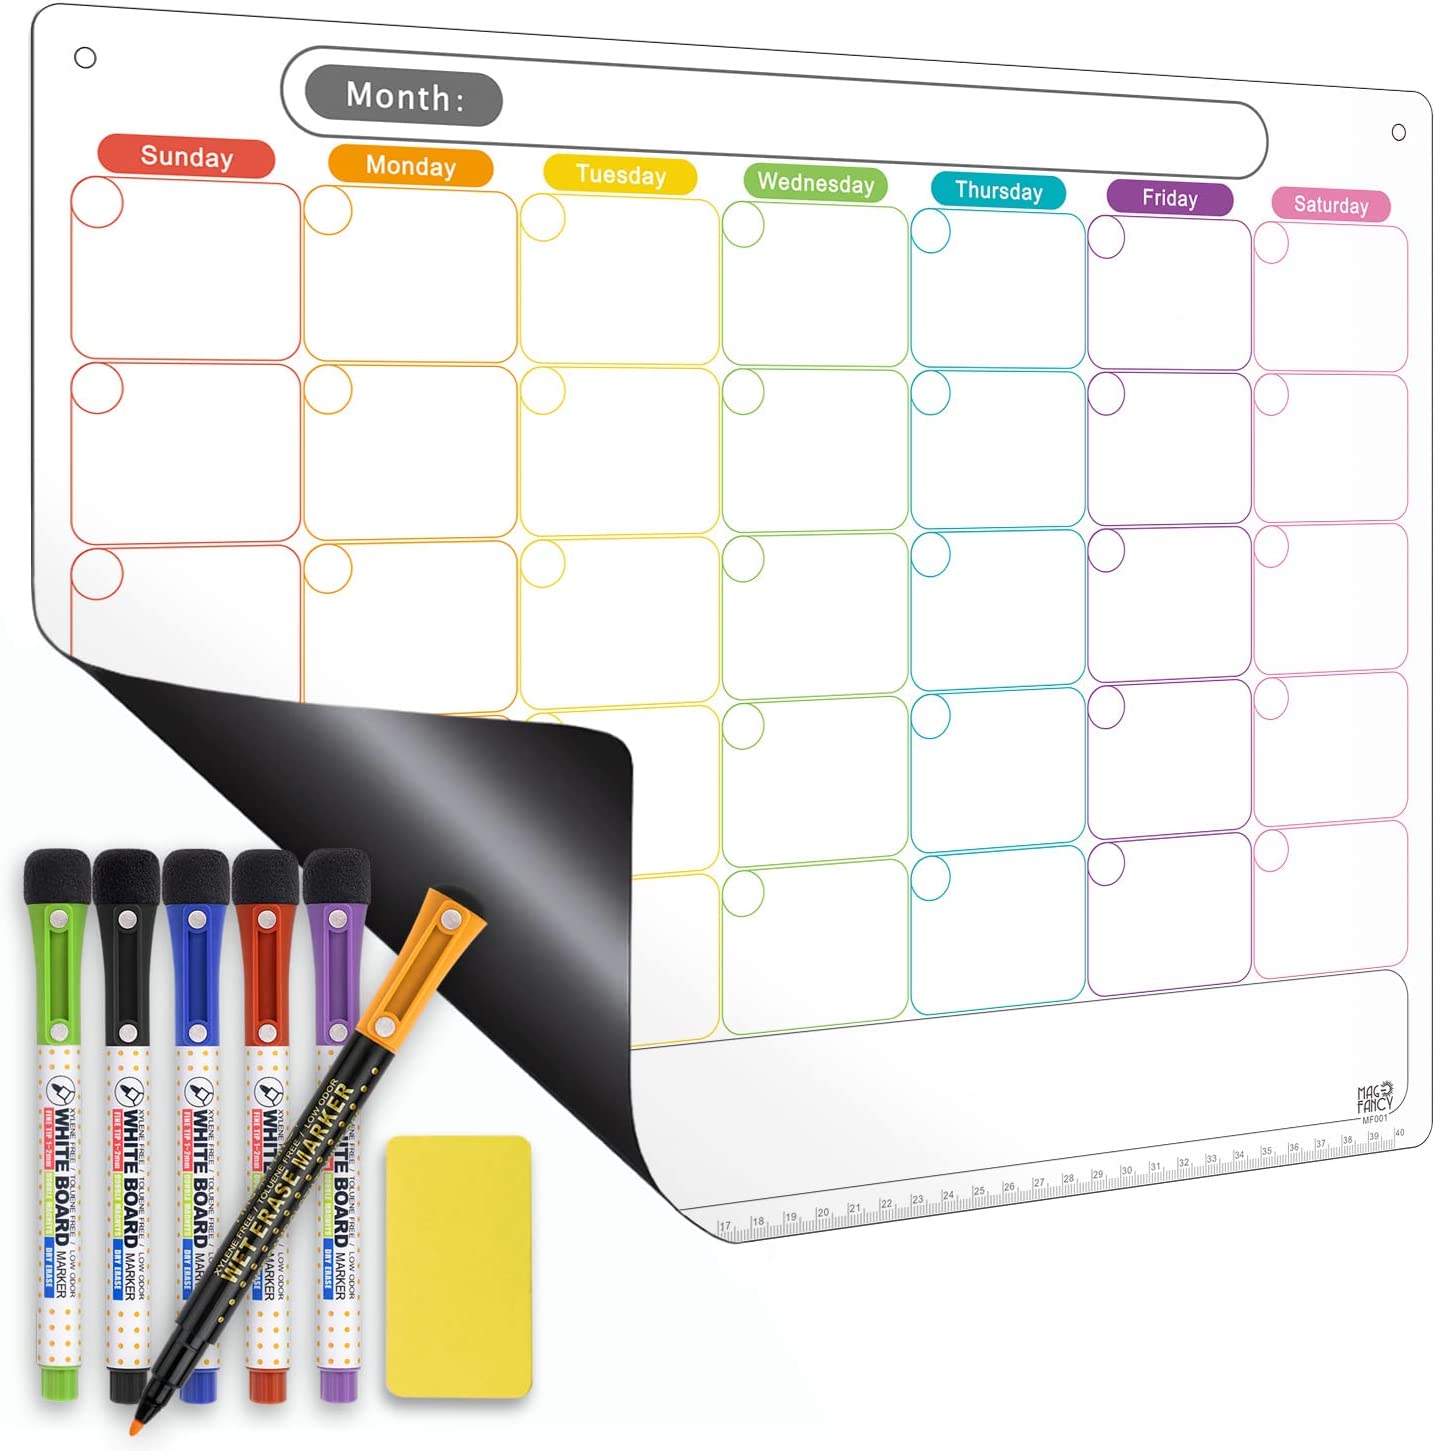 Dry Erase Calendar Kit- Magnetic Calendar for Refrigerator – Monthly Fridge Calendar Whiteboard with Extra-Thick Magnet Included Fine Point Marker & Eraser & Holes for Wall Hanging